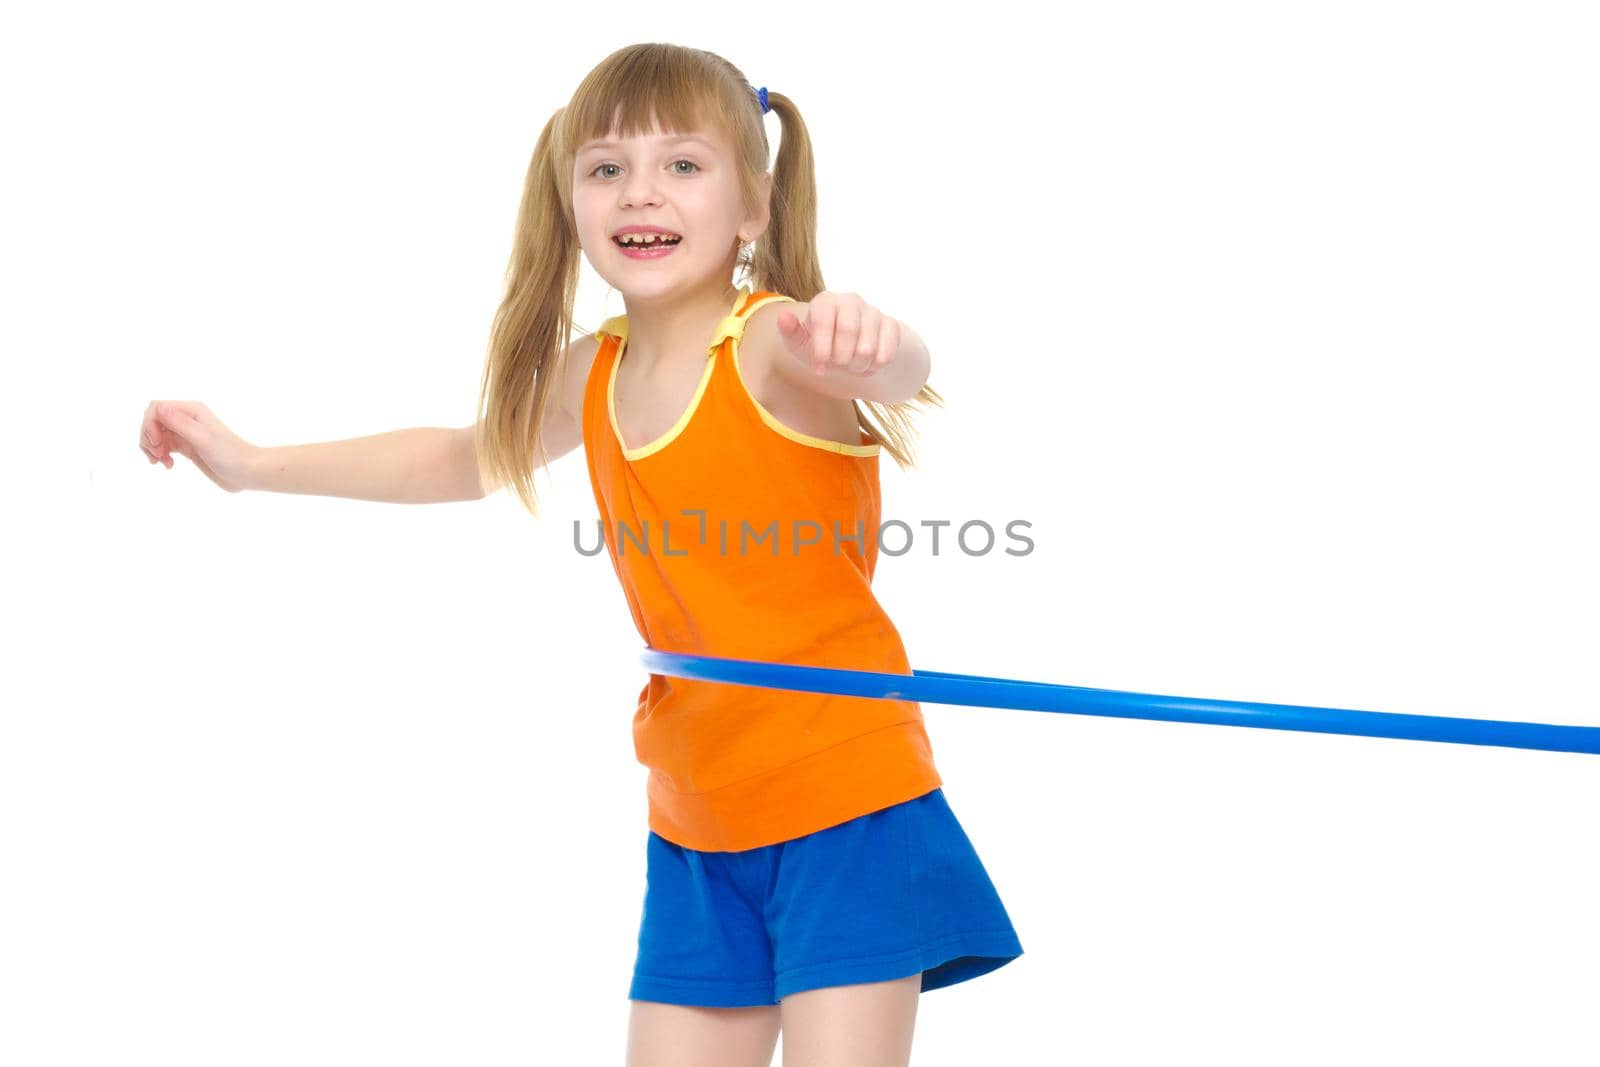 A girl gymnast performs an exercise with a hoop. The concept of gymnastics and fitness. Isolated on white background.